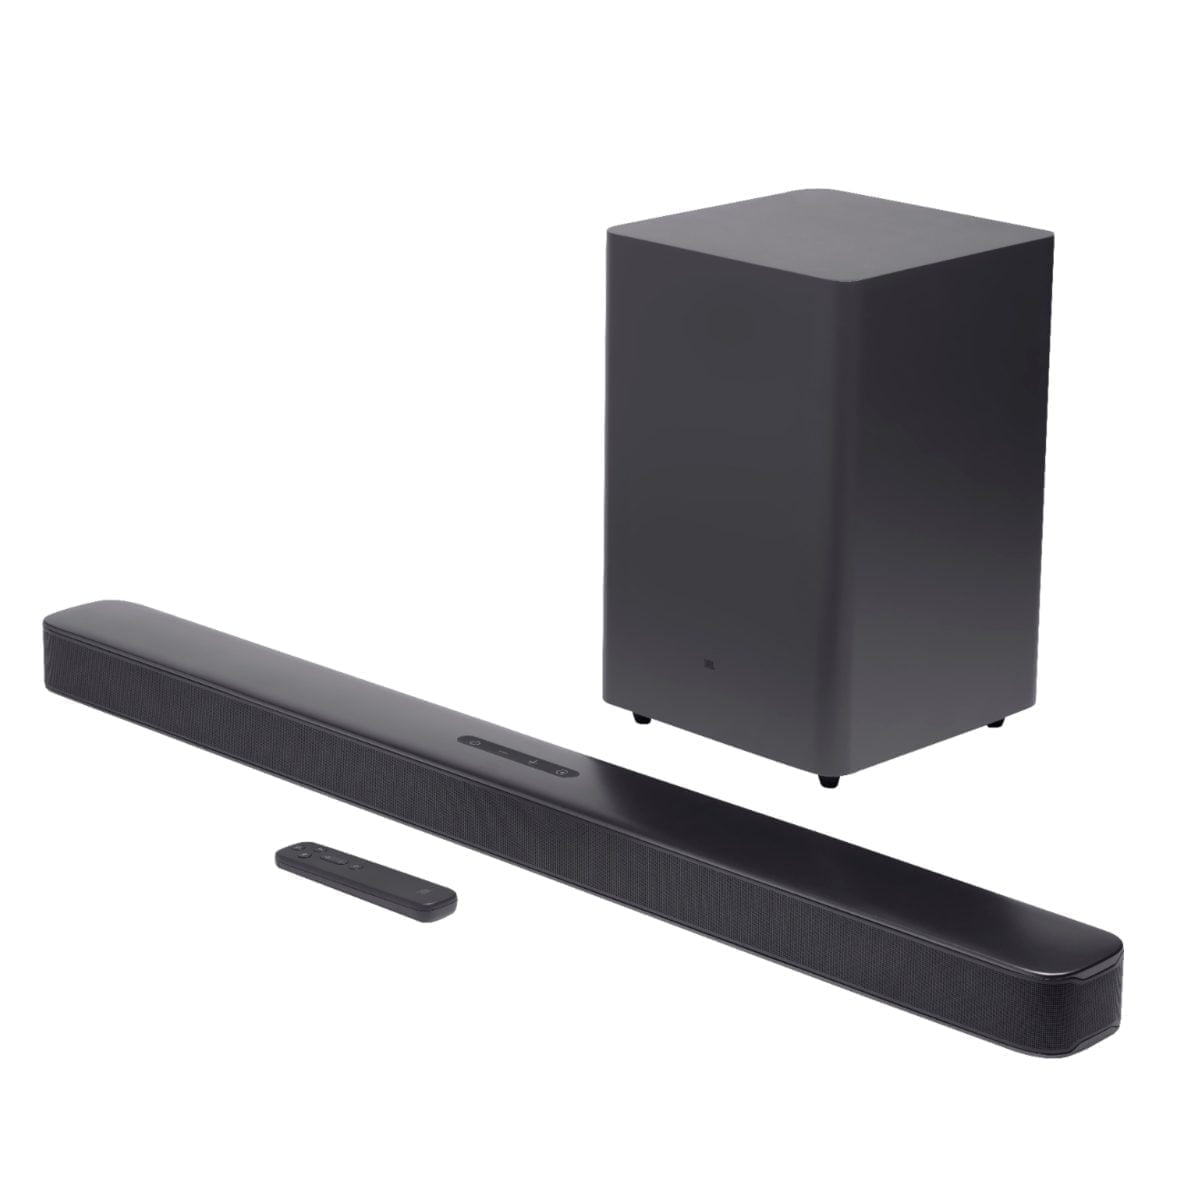 6395178 Rd Scaled Jbl &Amp;Lt;H1&Amp;Gt;Jbl - 2.1-Channel Soundbar With Wireless Subwoofer And Dolby Digital - Black&Amp;Lt;/H1&Amp;Gt; Elevate Your Cinematic Experience With This 2.1-Channel Jbl Bar Deep Bass Soundbar. The Wireless Subwoofer And Set Of Tweeters Fill Your Room With Immersive Audio, While Bluetooth Connectivity Lets You Stream Music Wirelessly. This Jbl Bar Deep Bass Soundbar Features A Low-Profile Design For A Contemporary Look, And Built-In Dolby Digital Offers Increased Clarity. Jbl Soundbar Jbl - 2.1-Channel Soundbar With Wireless Subwoofer And Dolby Digital - Black